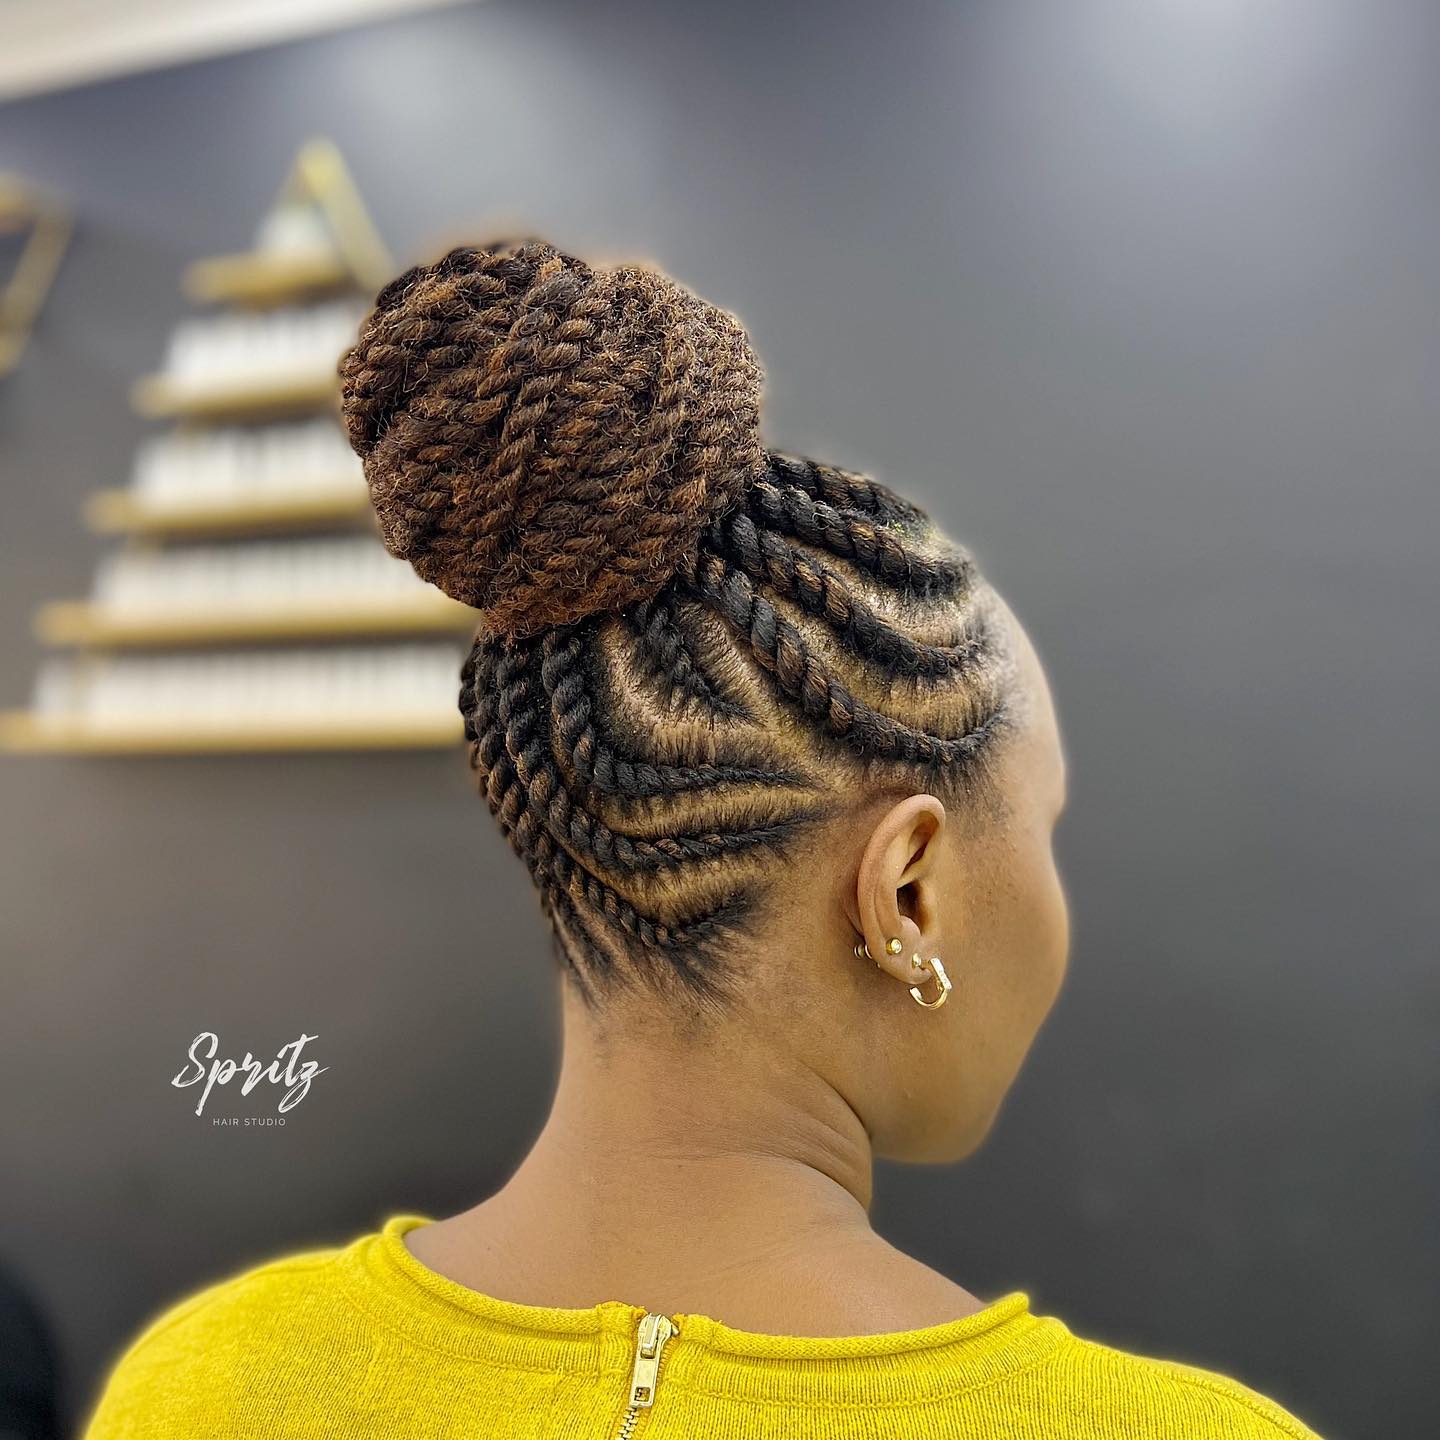 44 Unusual Twist Hairstyles to Inspire Your New Look - Hairstylery